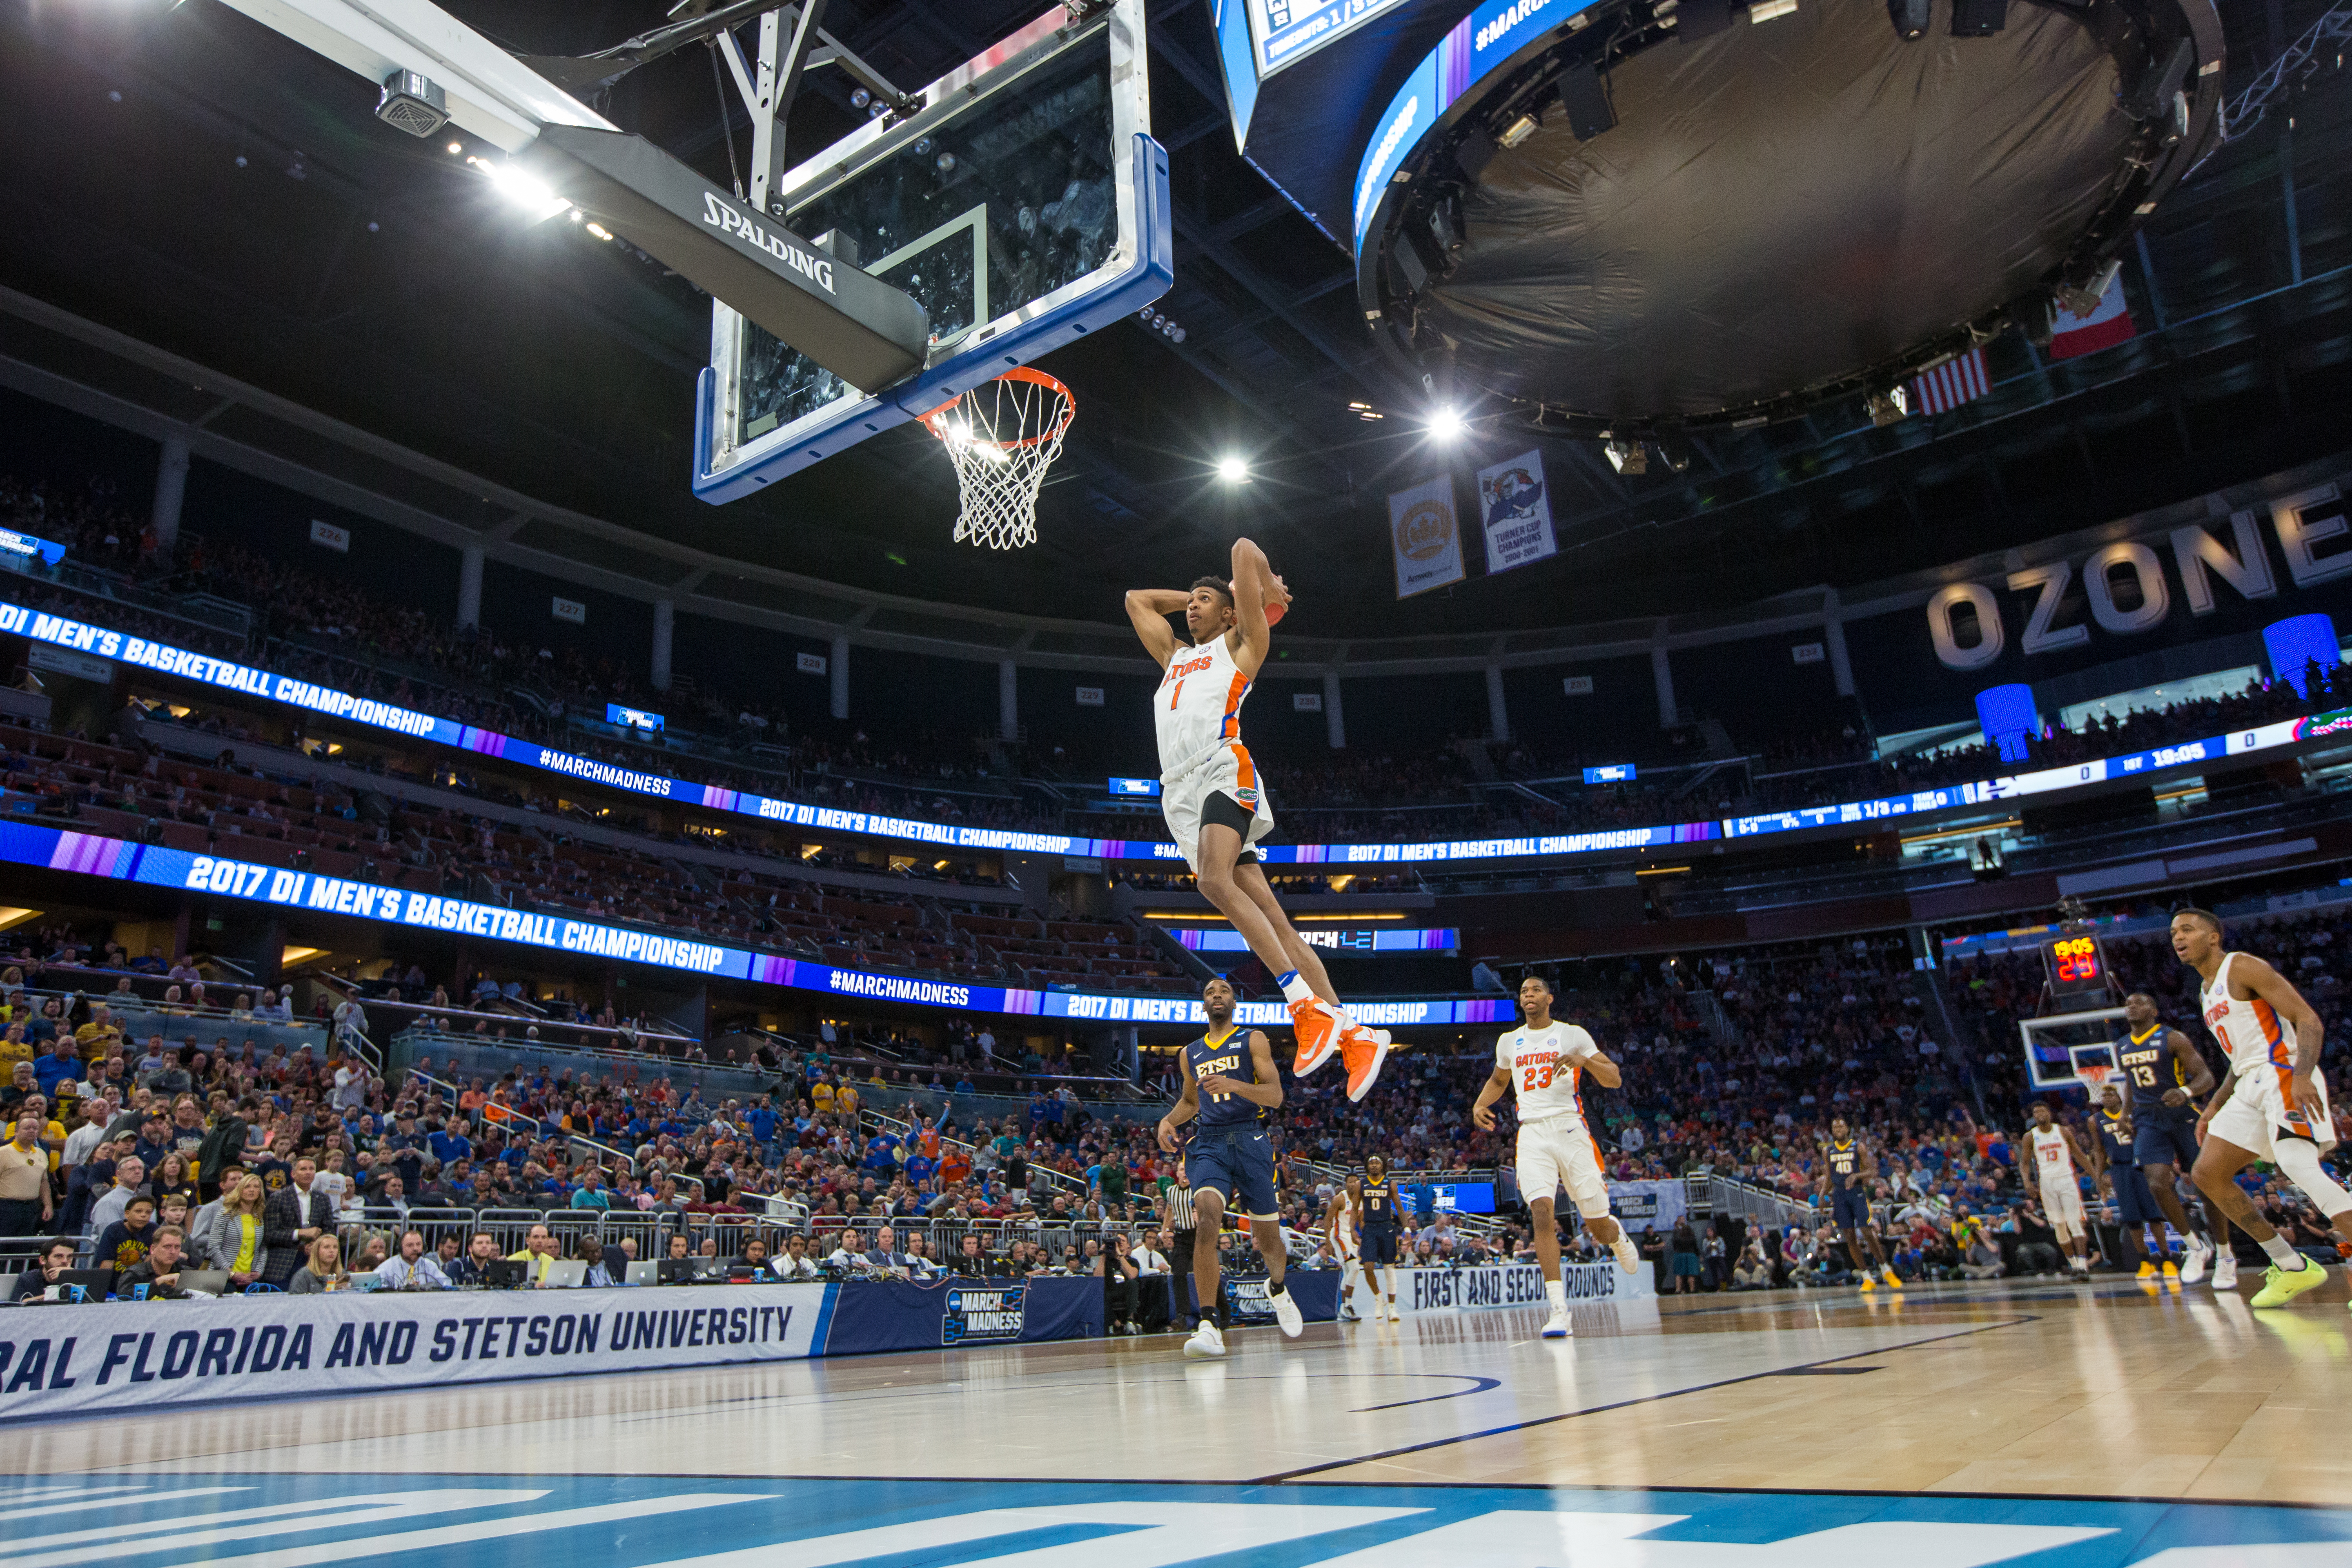 March Madness Basketball at the Amway Center in Orlando, Florida